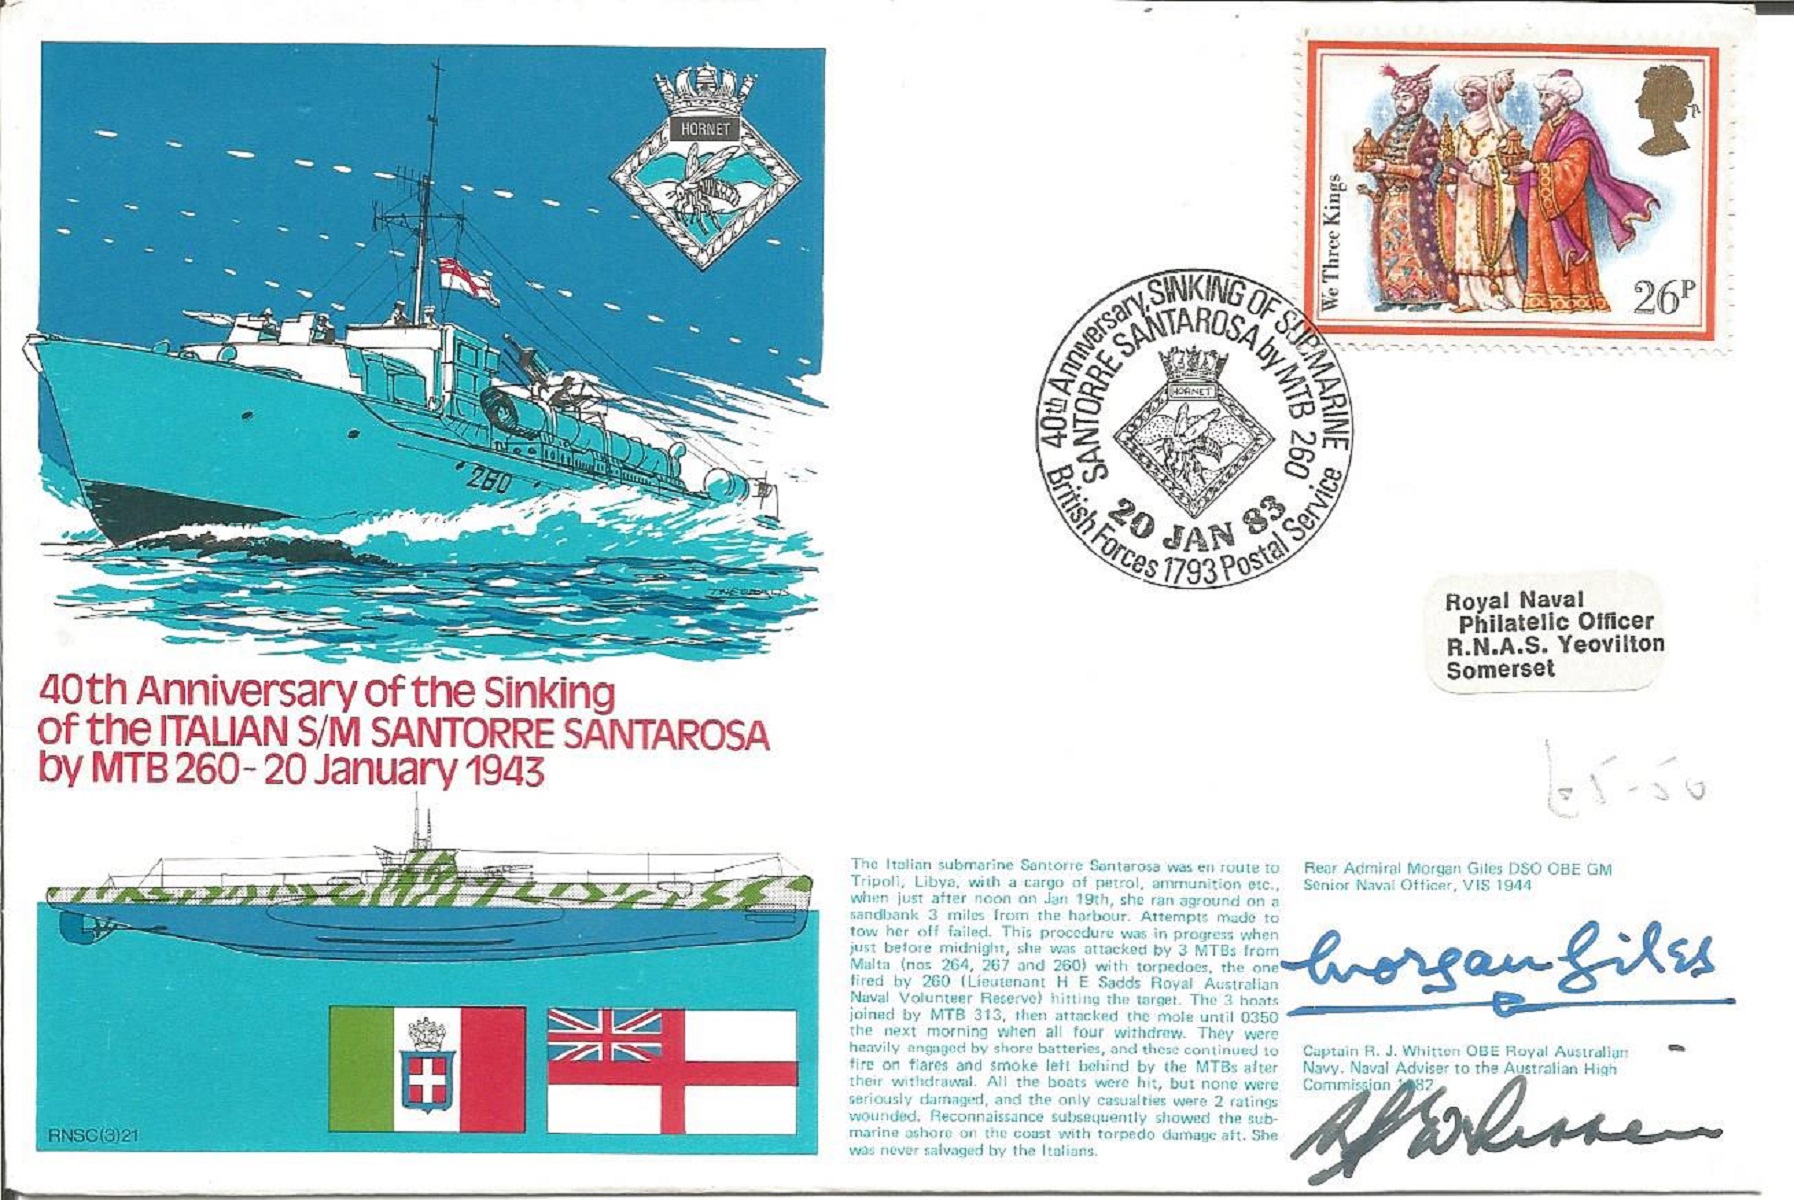 Rear Admiral Morgan Giles and Captain R J Whitten signed RNSC(3)21 cover commemorating the 40th